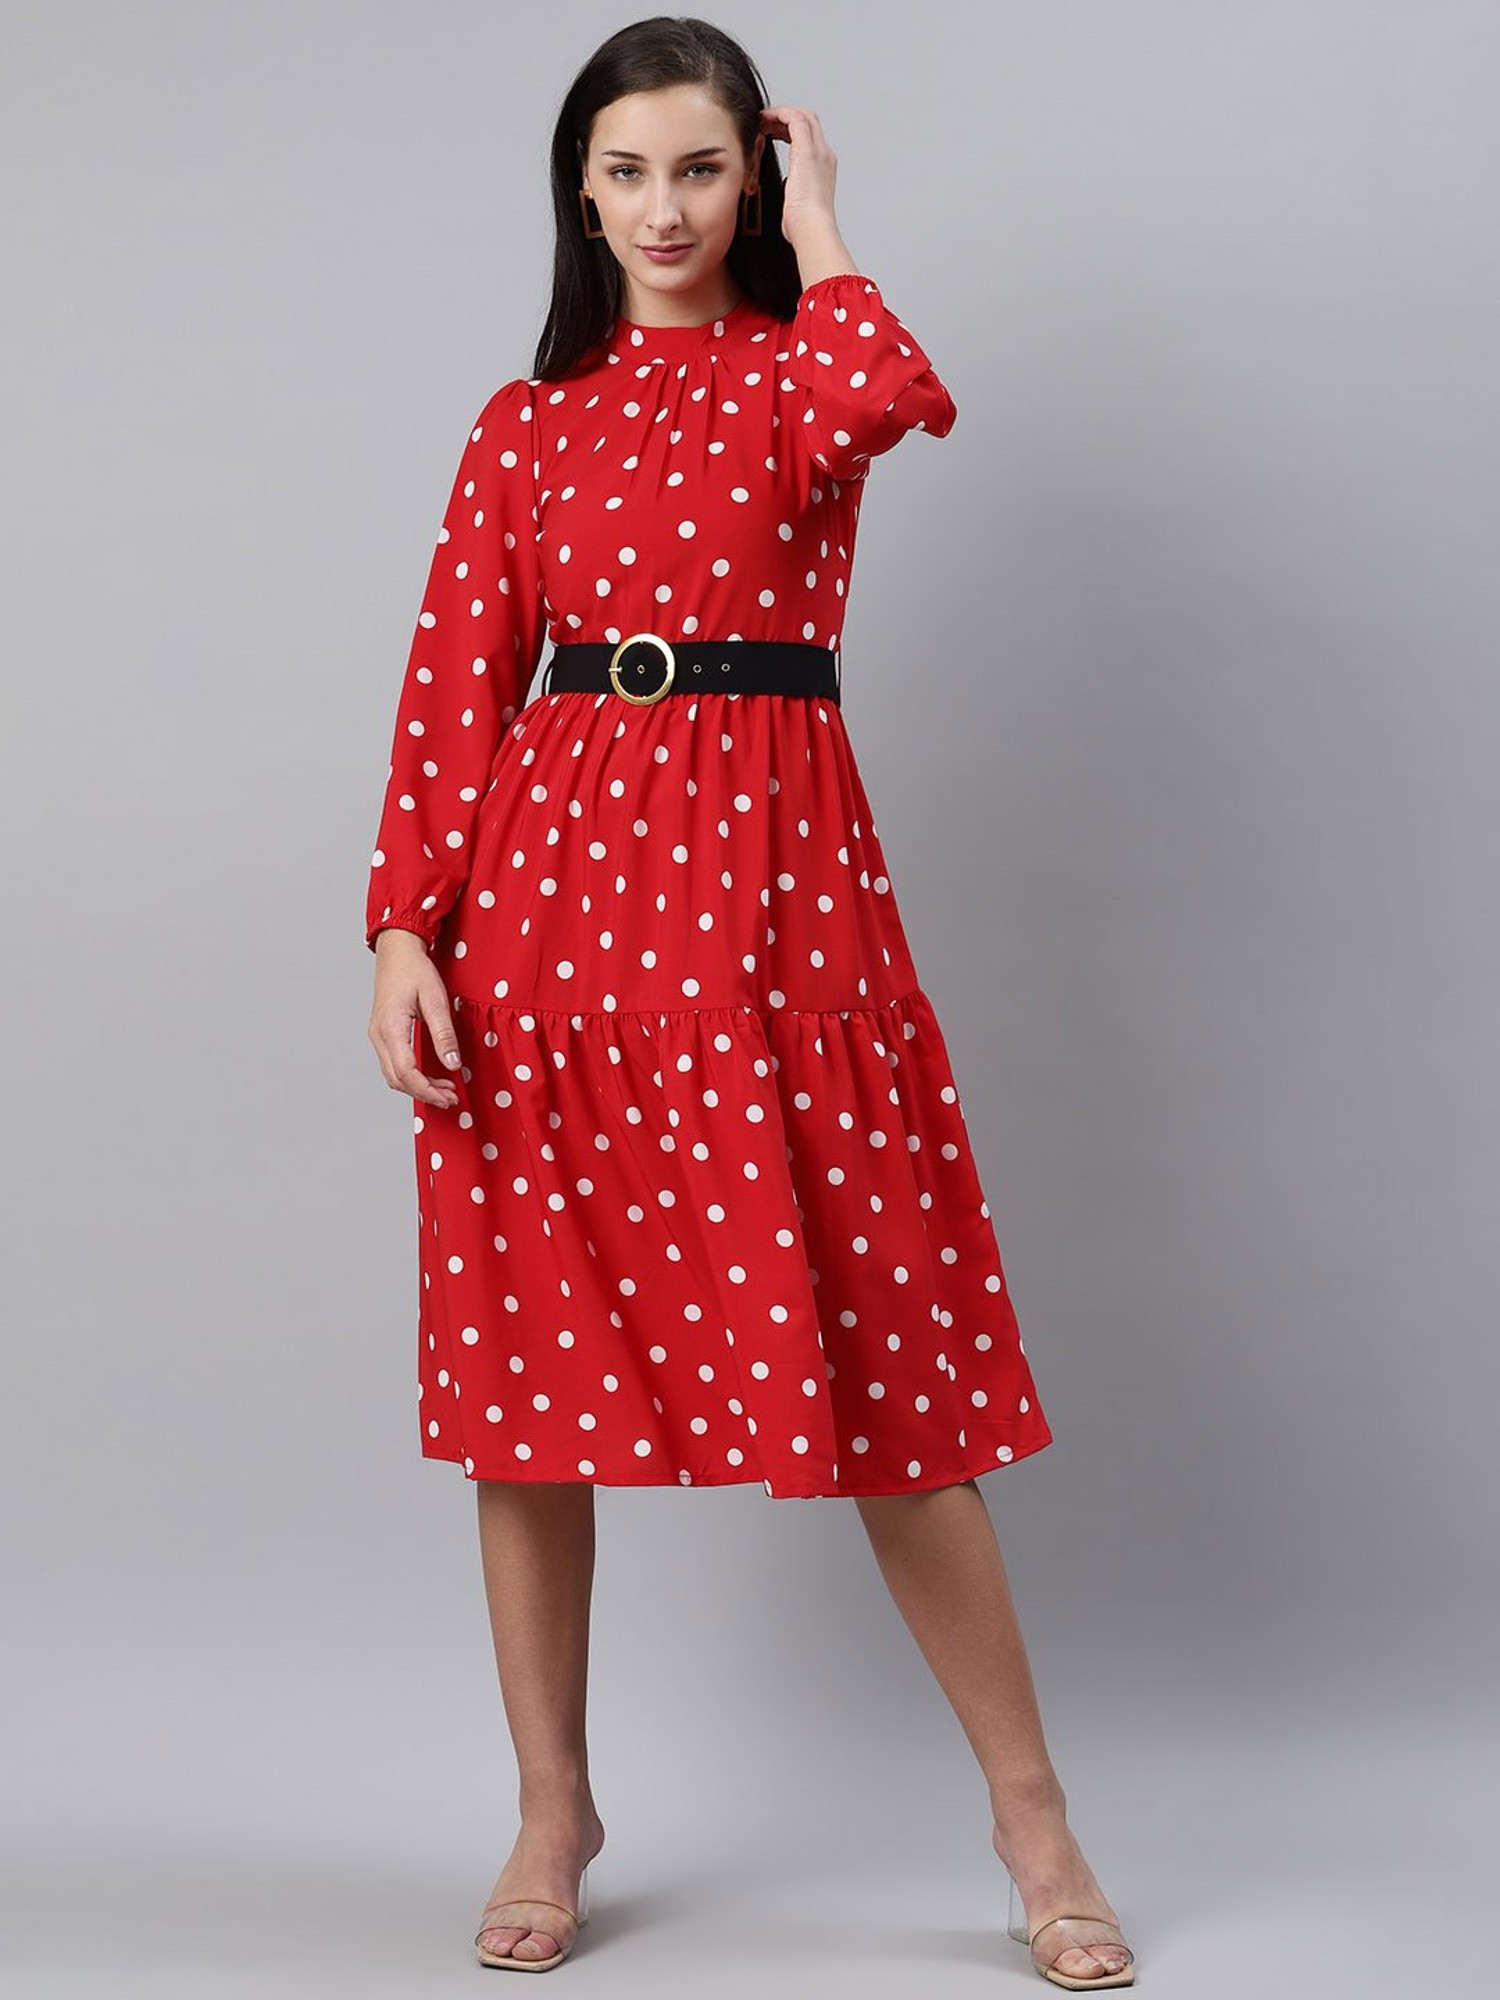 13 times Kate Middleton, Deepika Padukone and other A-listers made polka  dots wardrobe must-haves | Vogue India